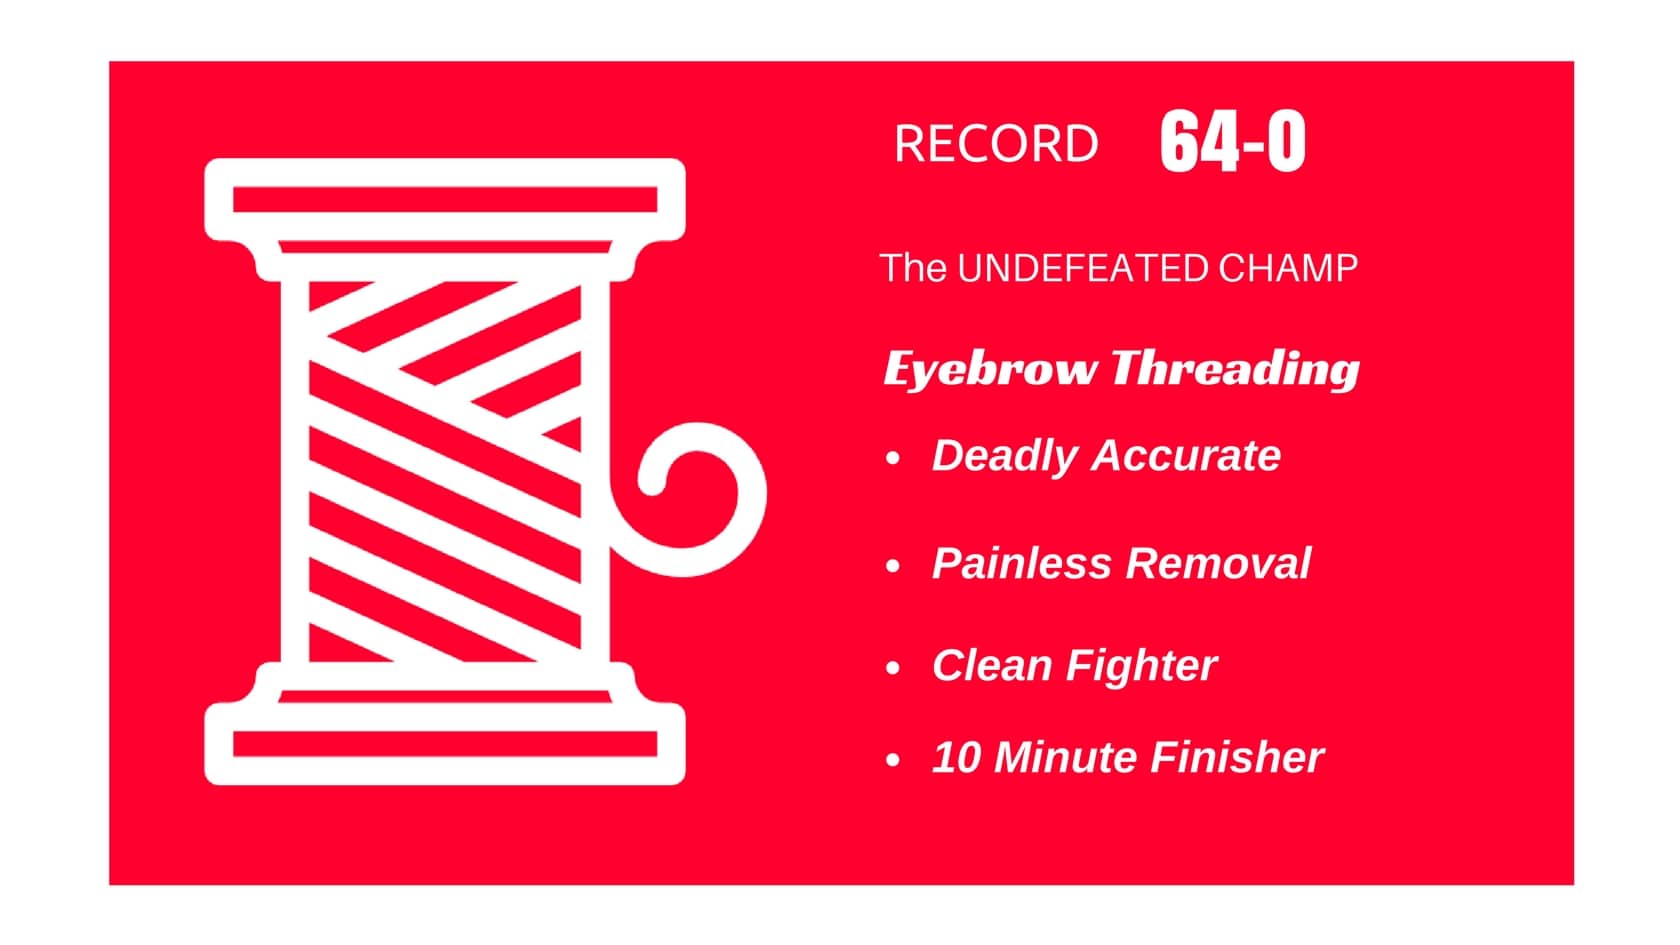 Eyebrow Threading : Accurate, Painless Removal, Clean & Faster